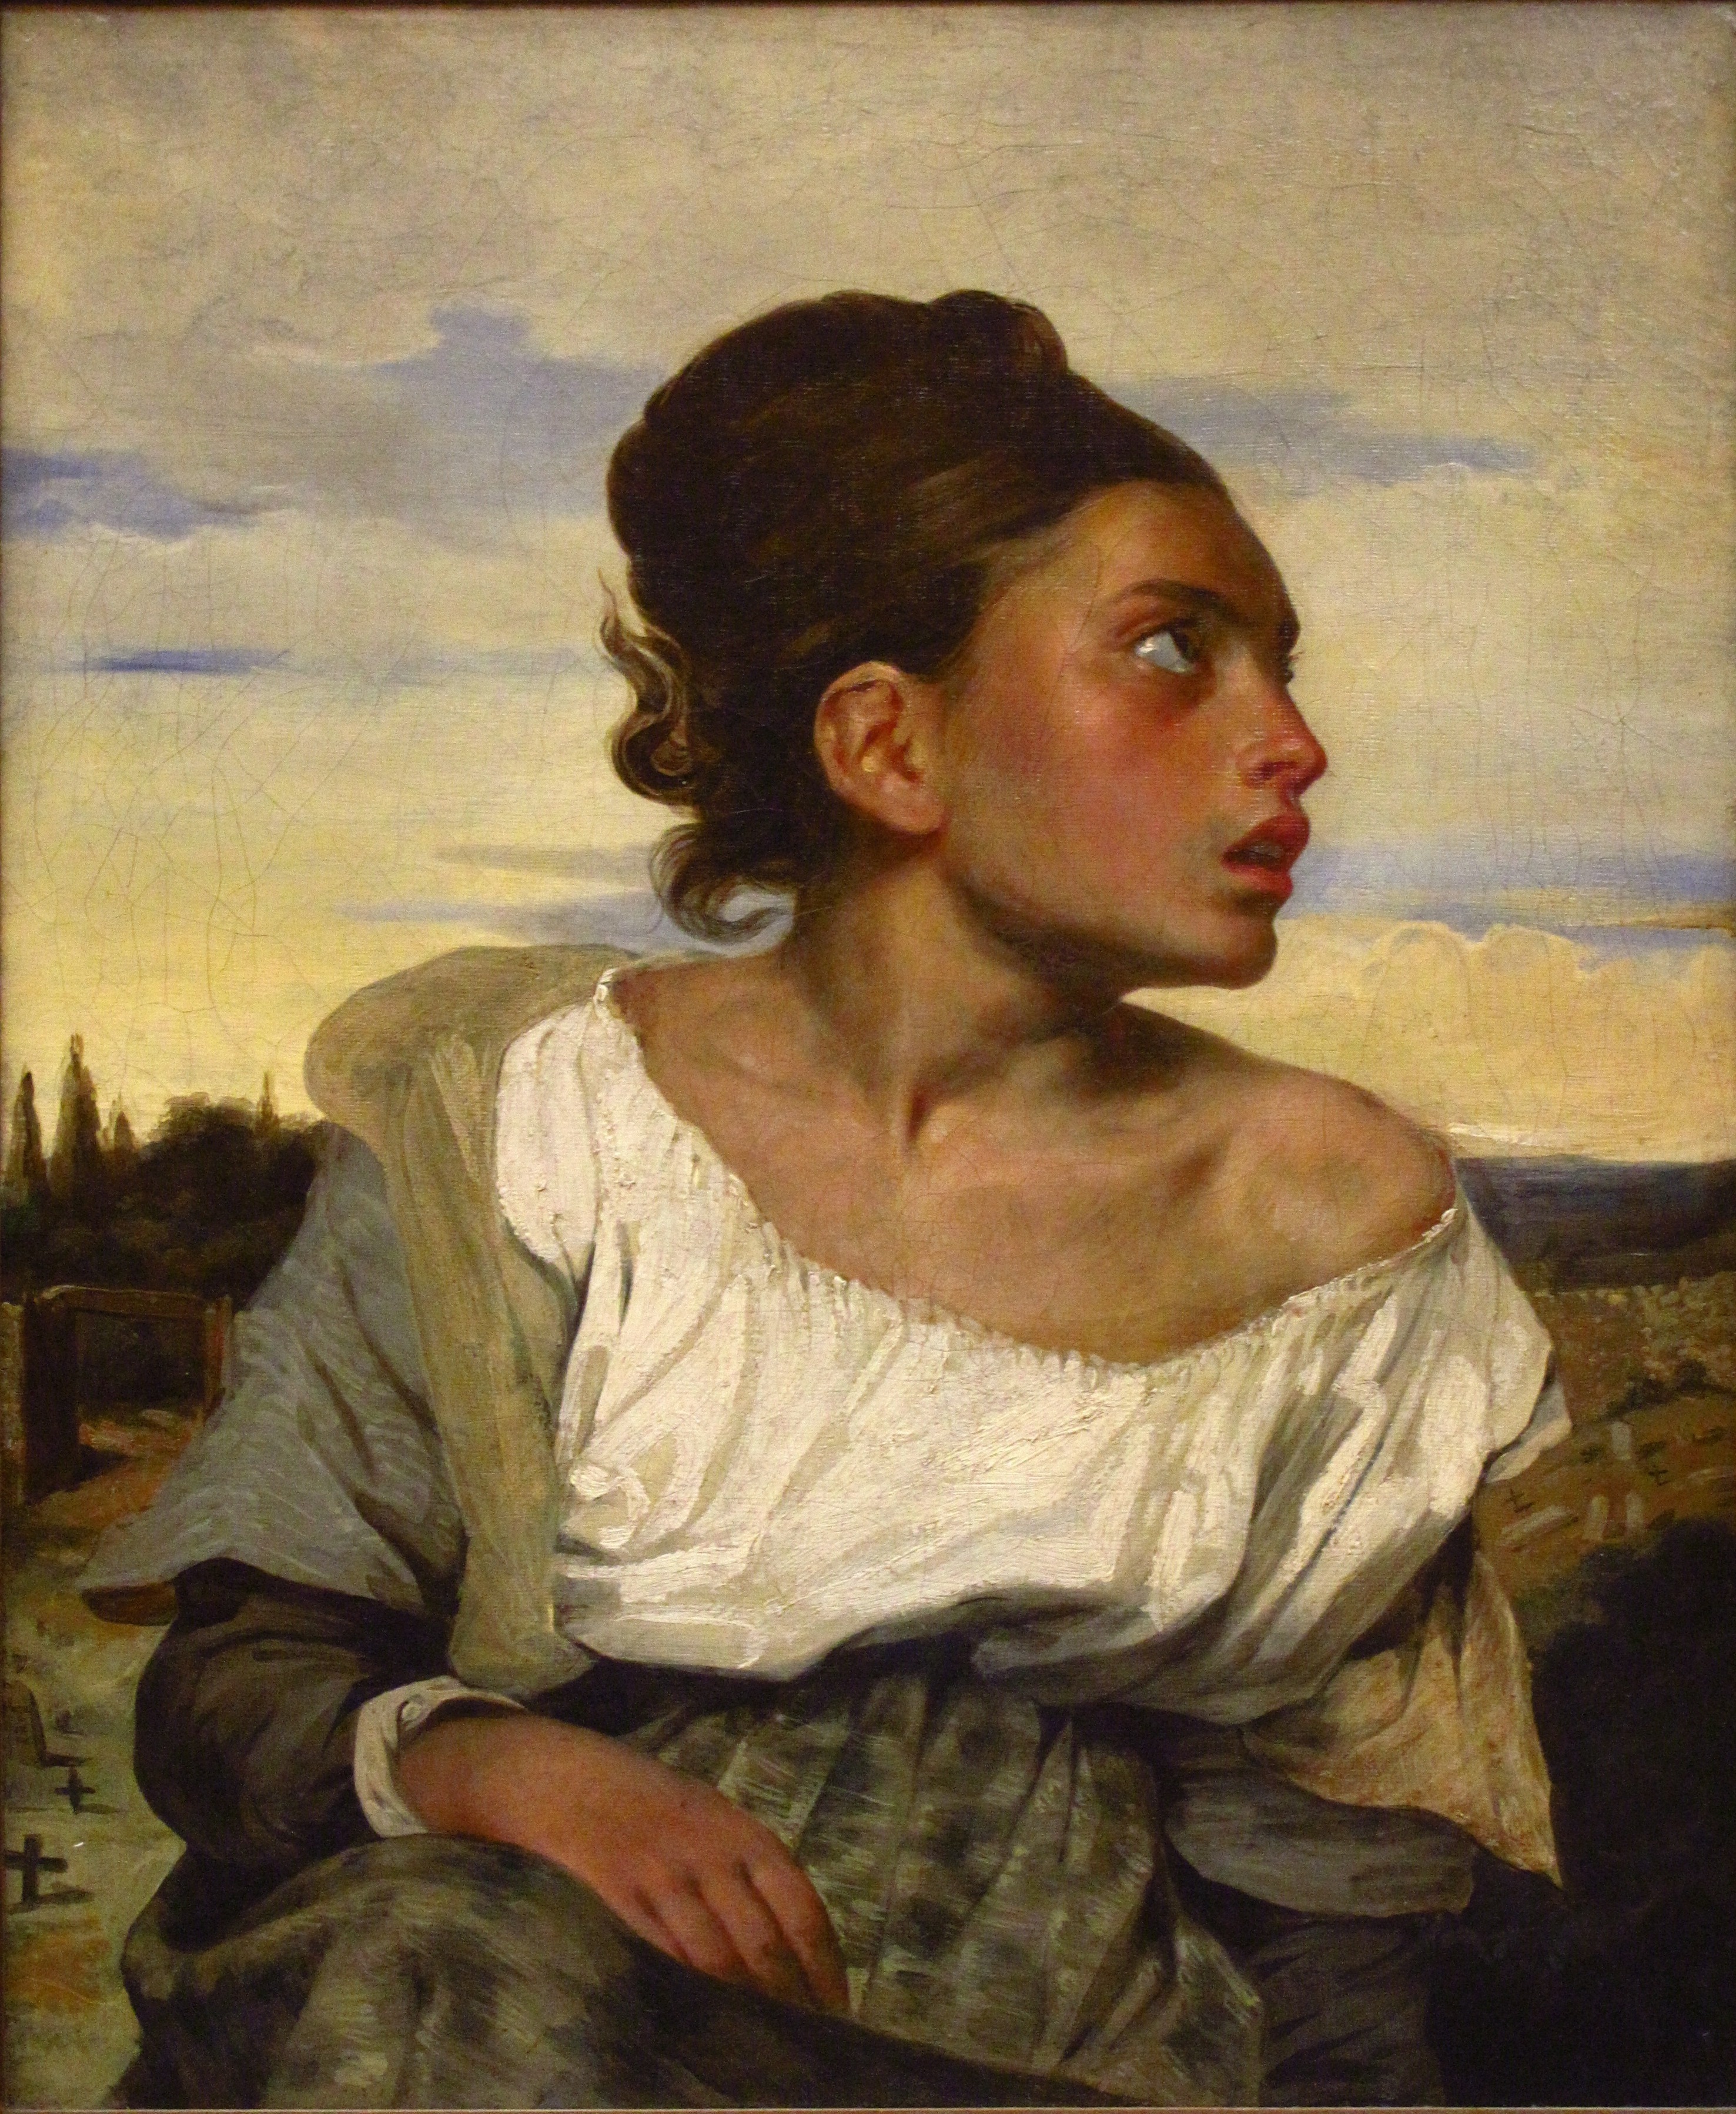 Young Orphan Girl in the Cemetery by Eugène Delacroix - 1824 - 66 × 54 cm Musée du Louvre